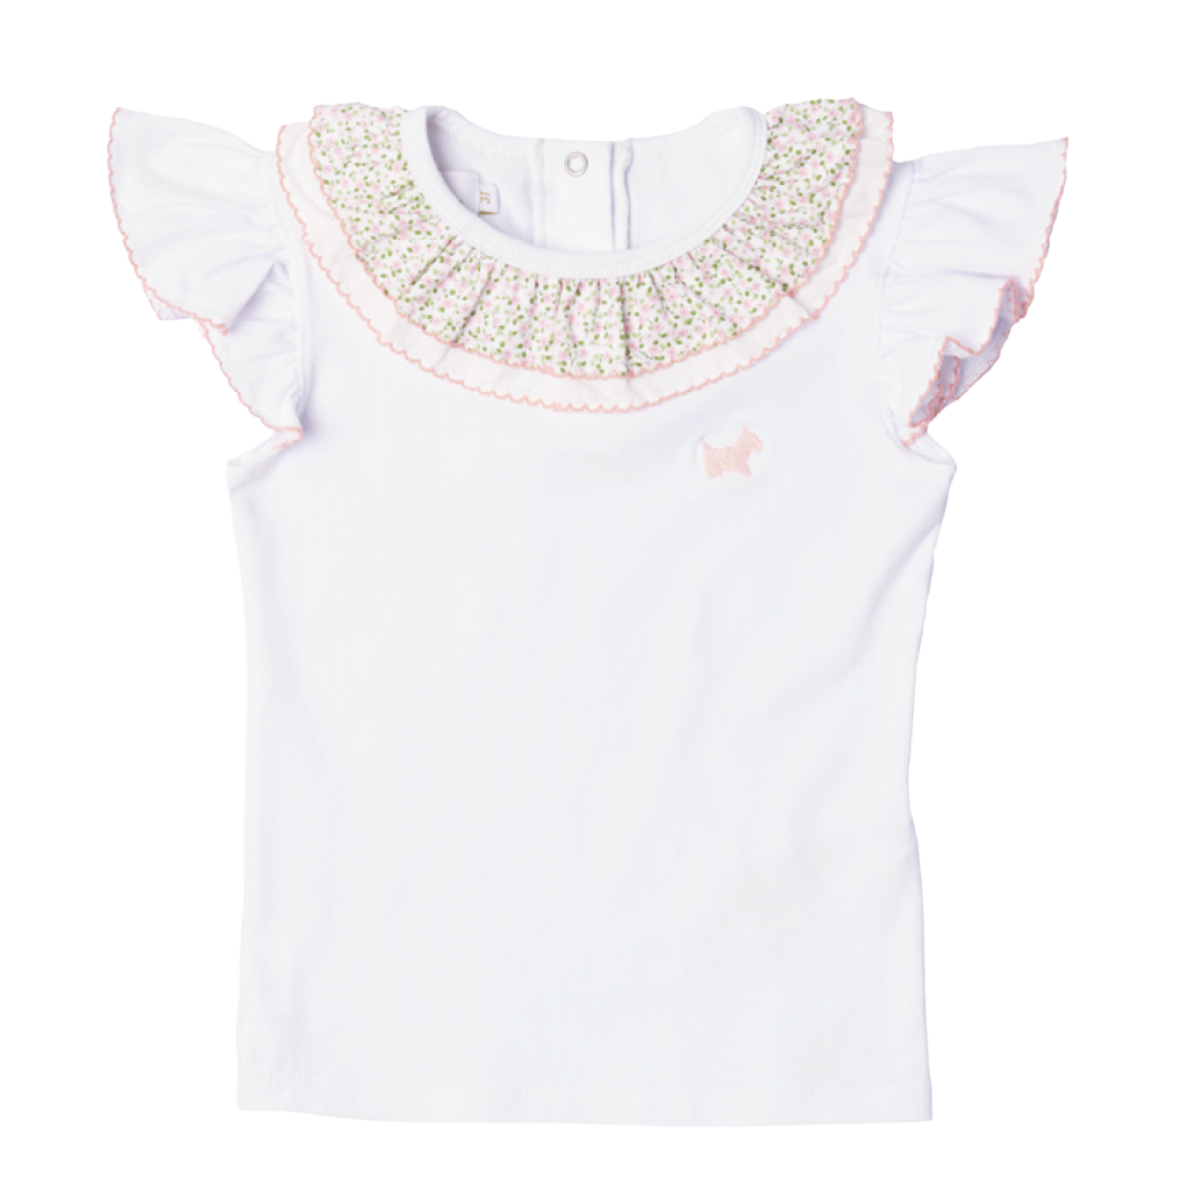 Girls white polo with ruffle sleeve and floral print ruffle collar by Sal and Pimenta. 